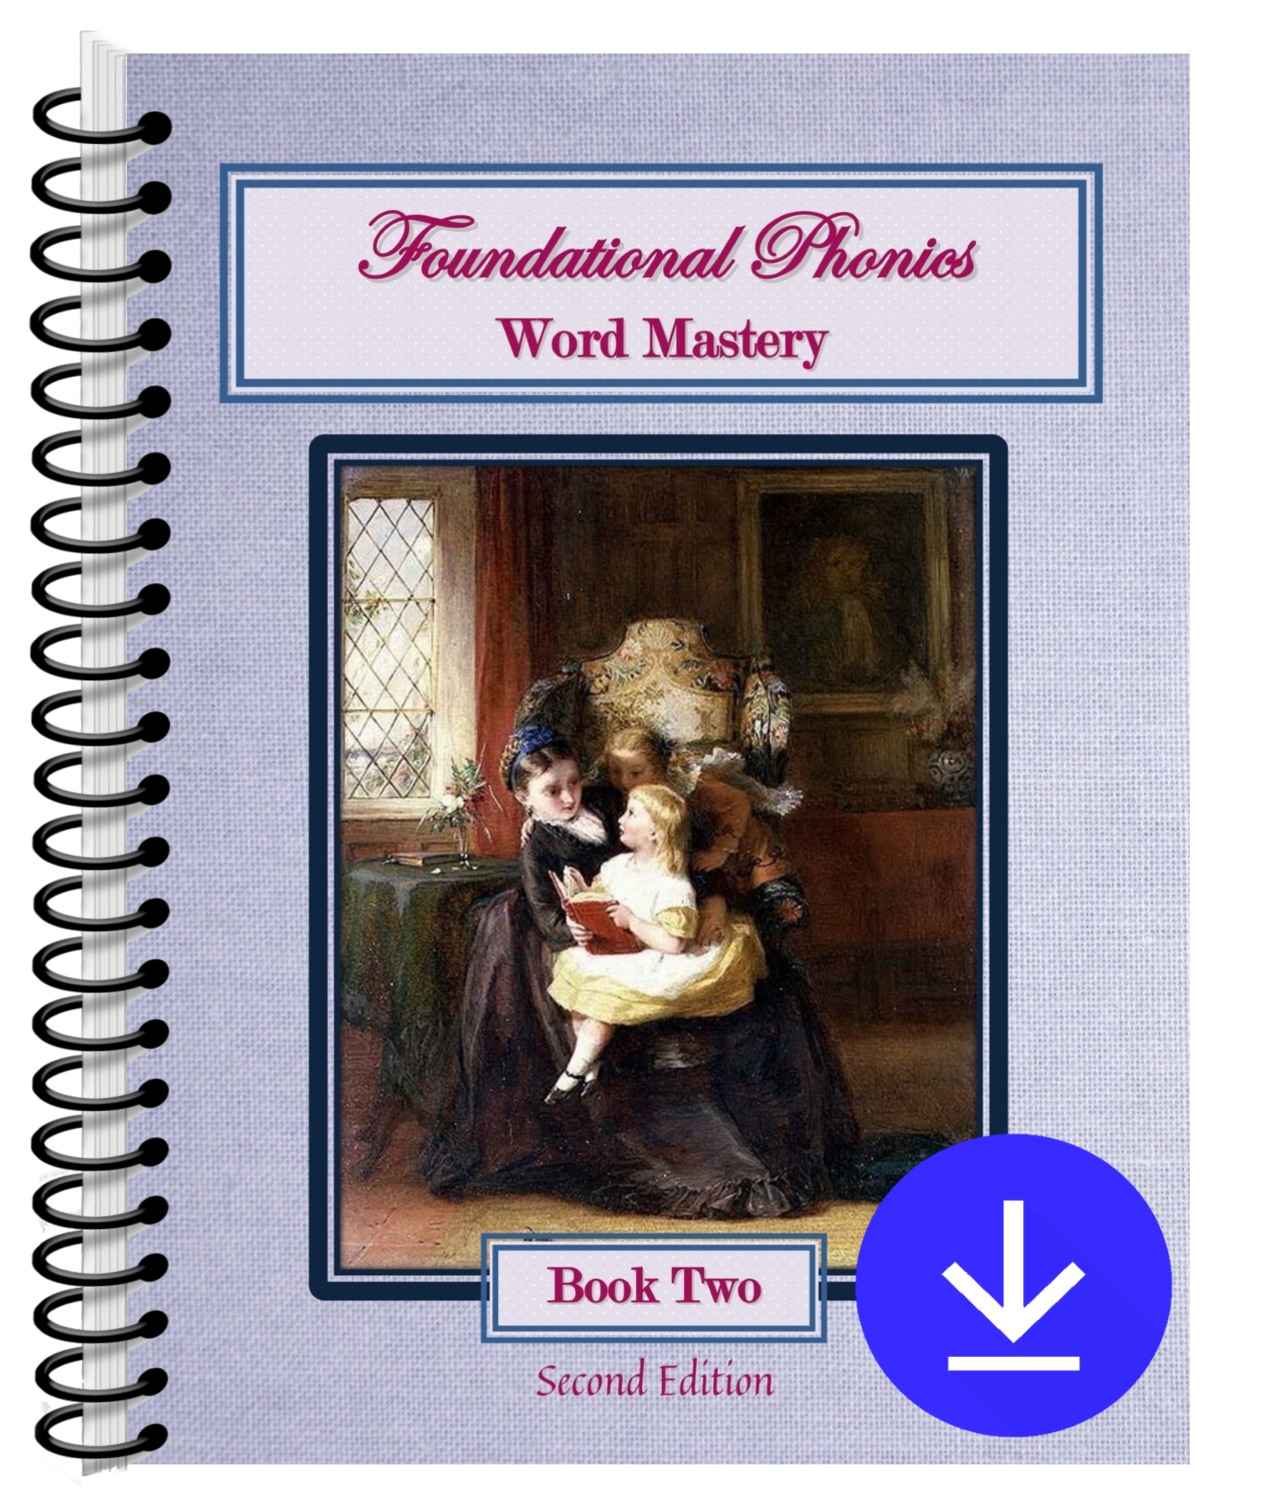 Word Mastery - Book Two PDF Download